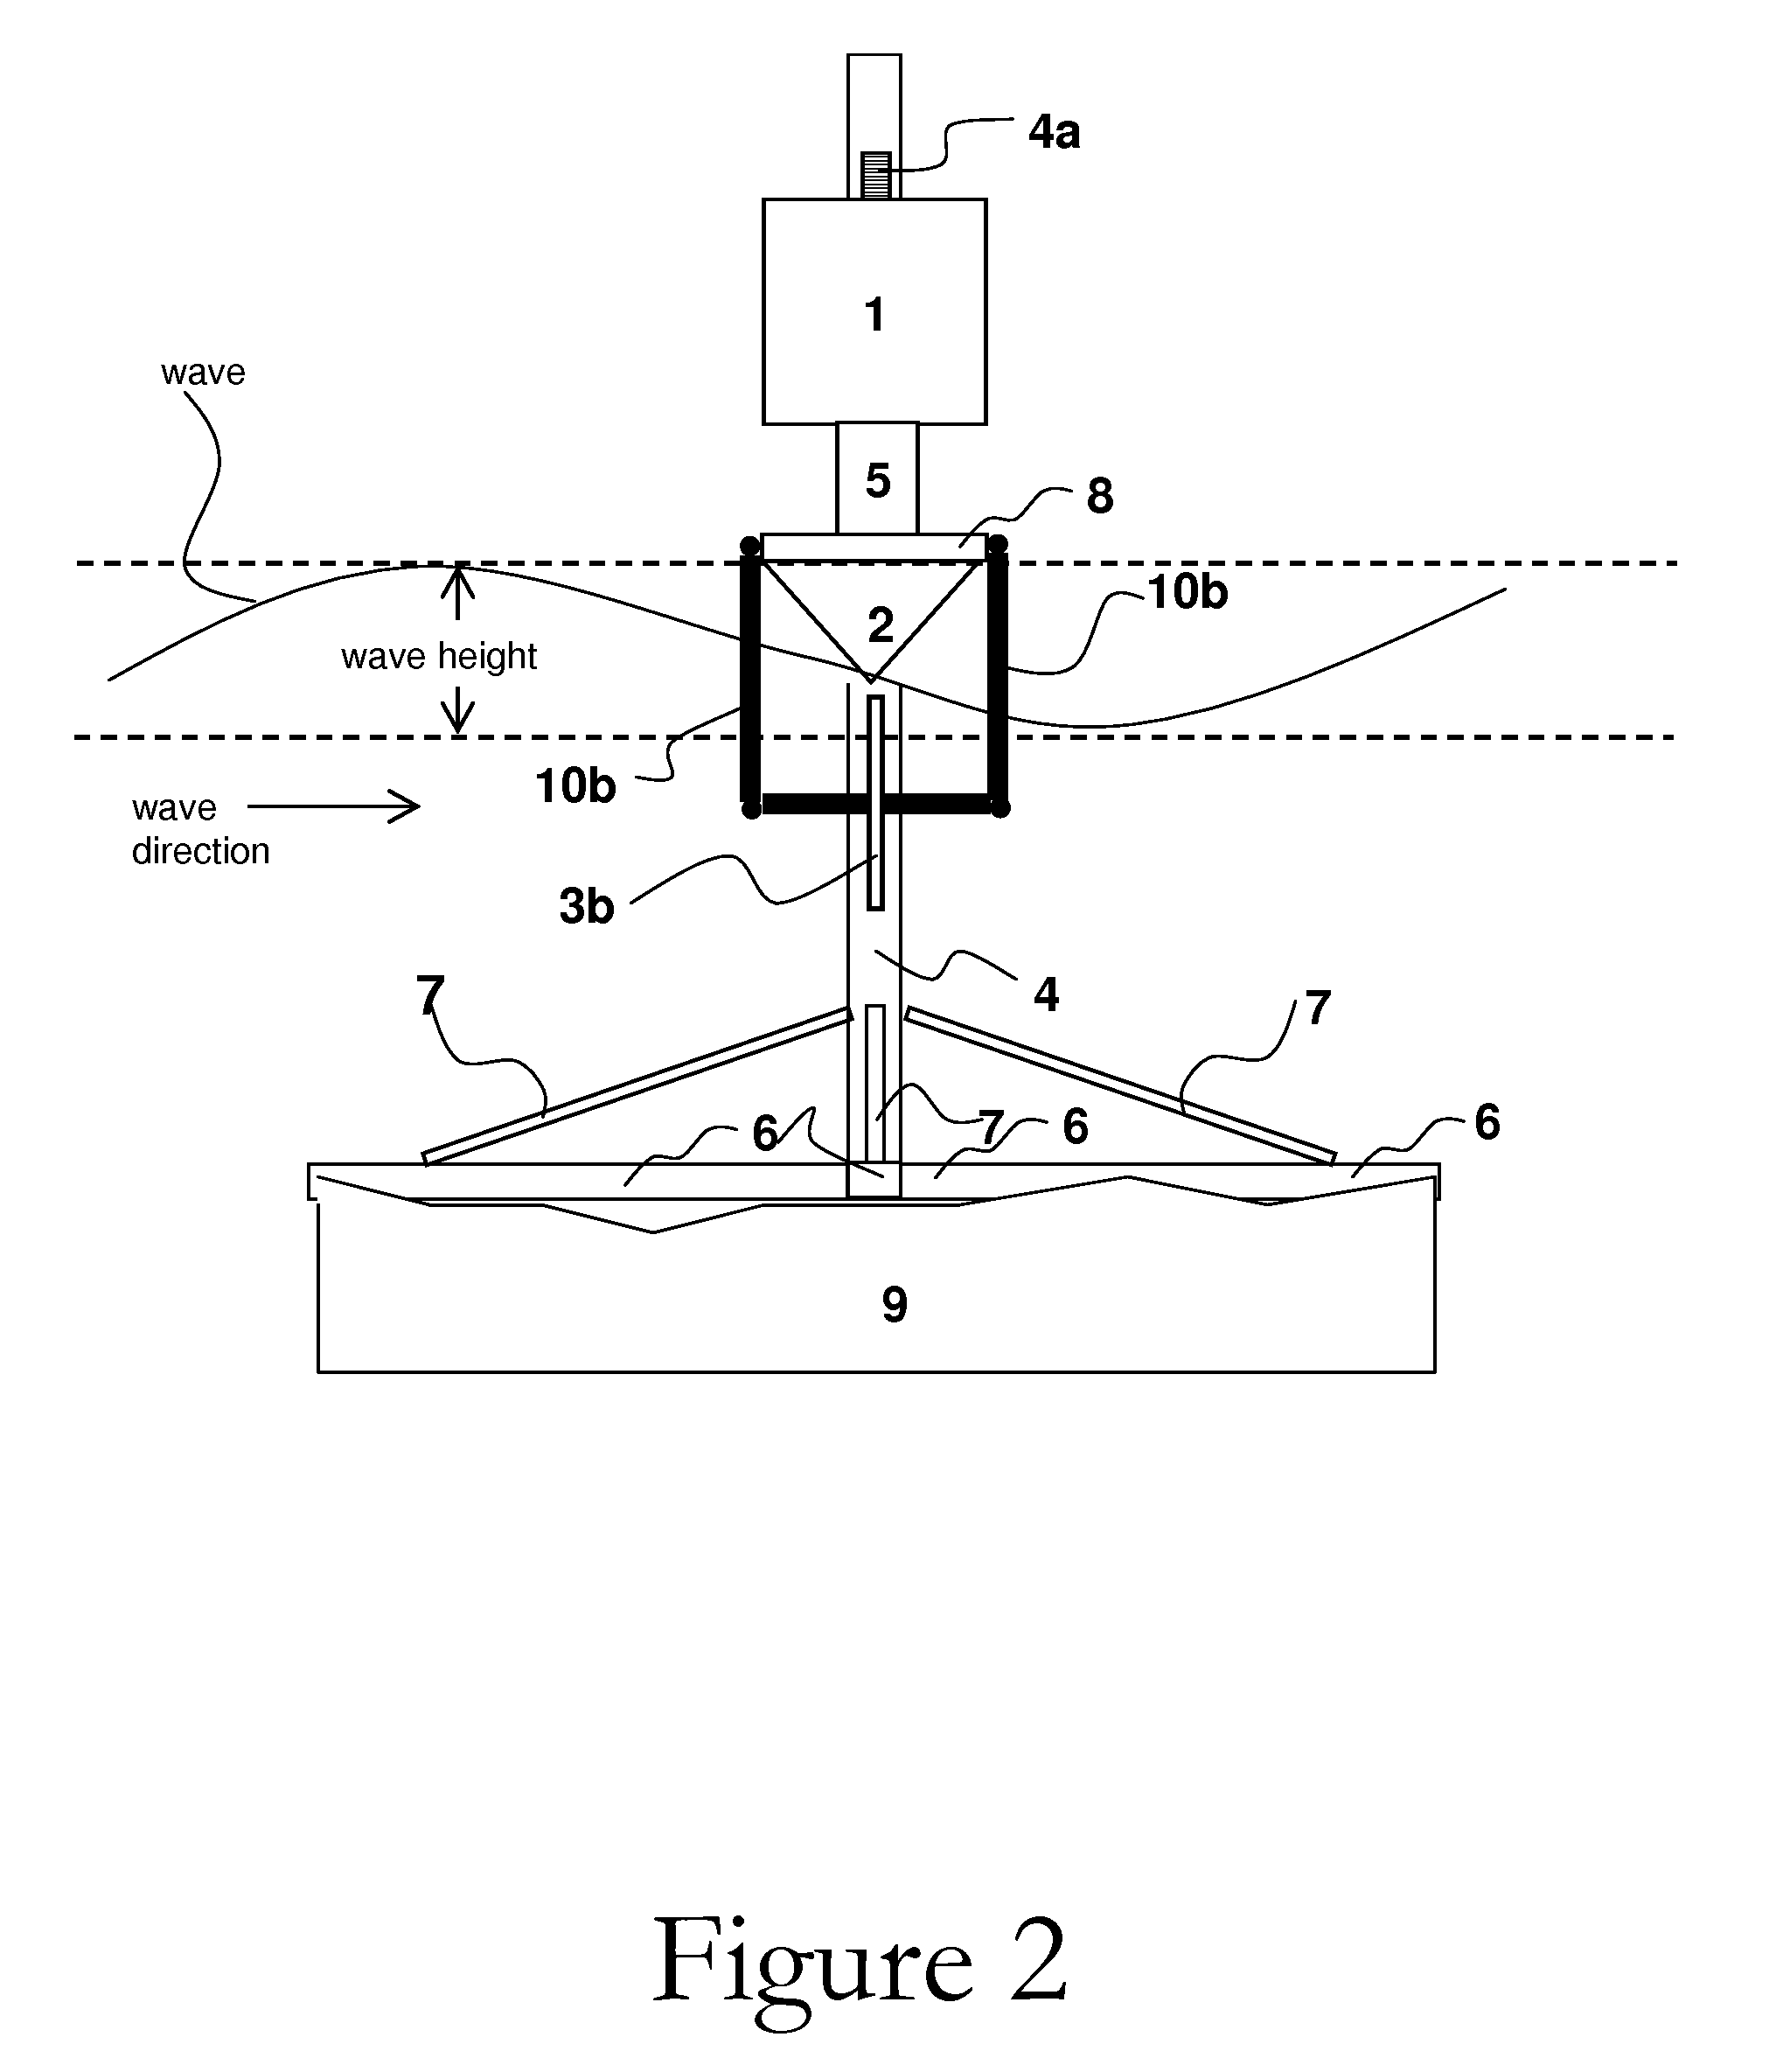 Wave power system for extracting simultaneously both potential and kinetic energy at variable significant wave heights and periods